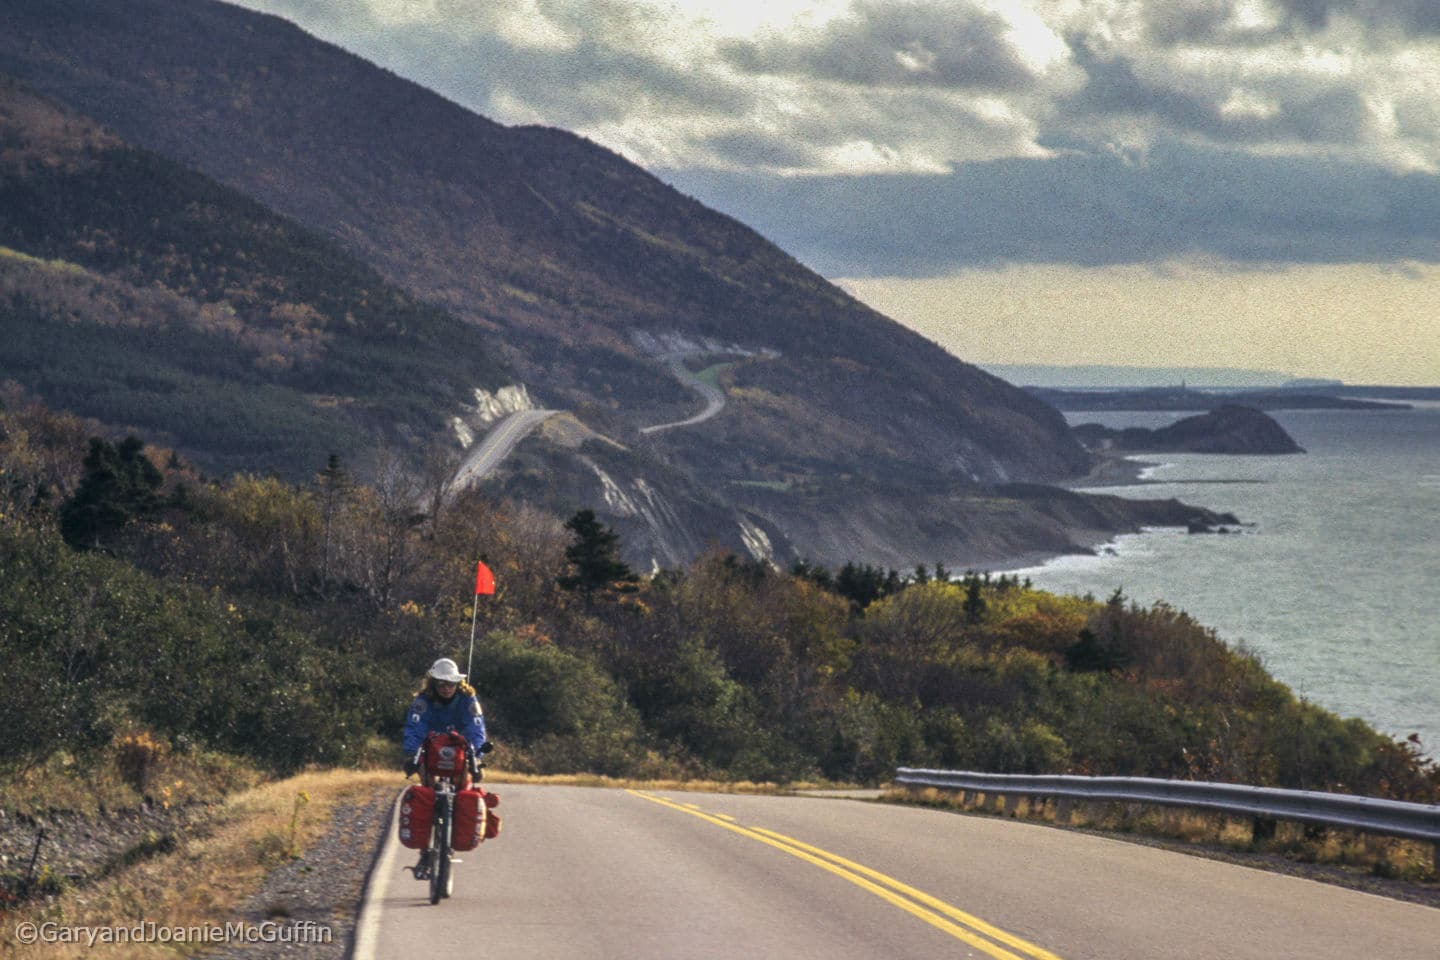 Biker on a highway with mountains and shore line in background